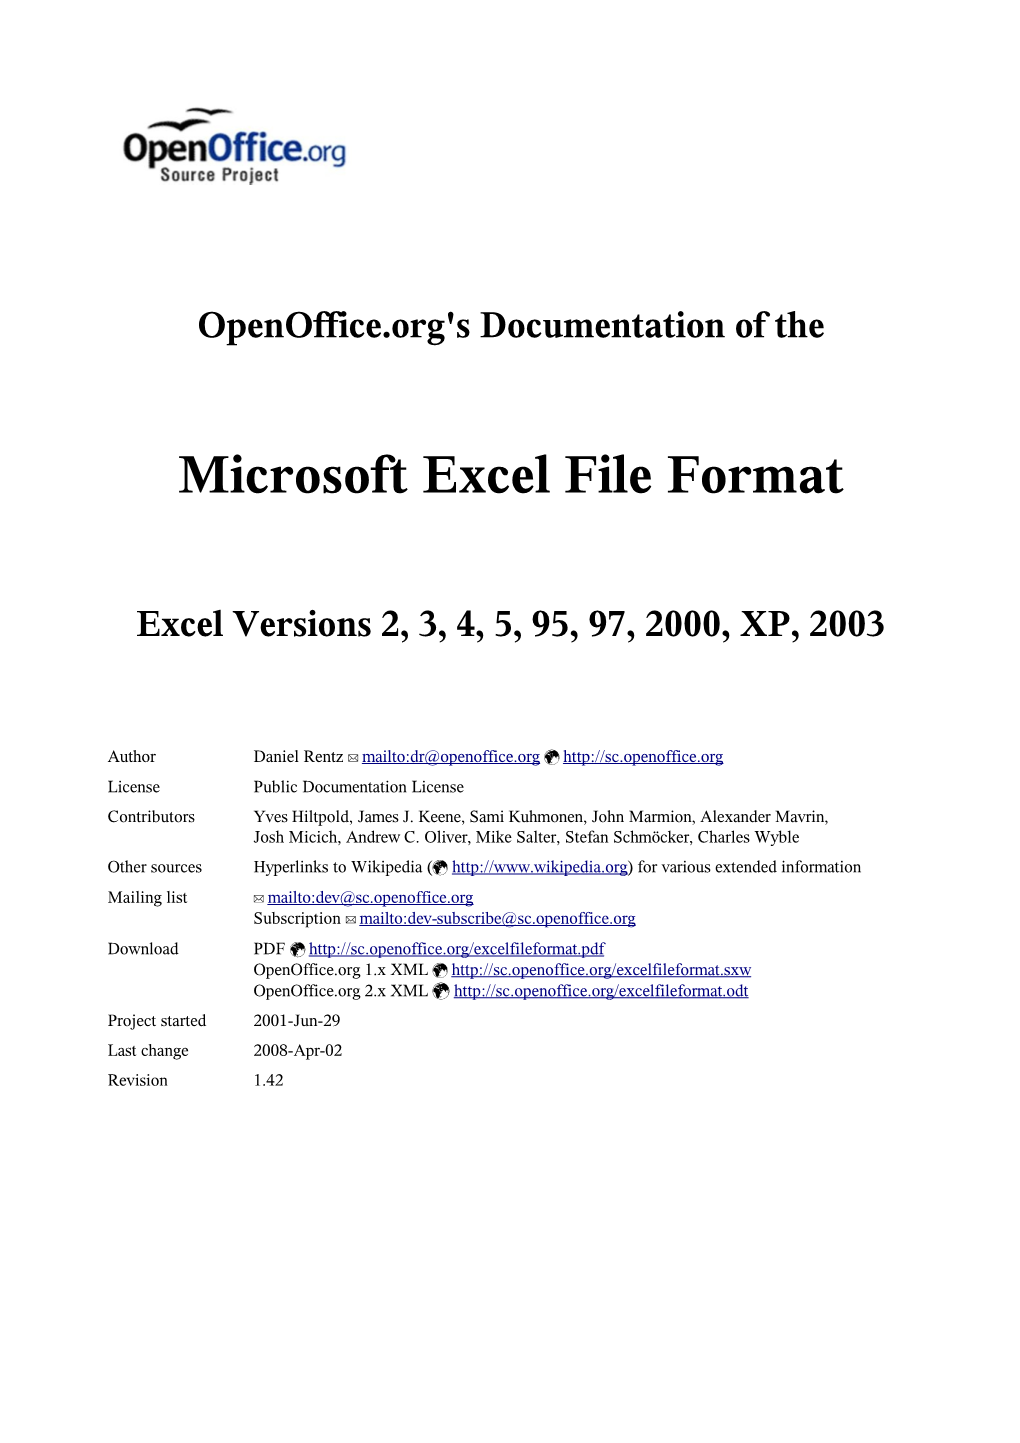 The Microsoft Excel File Format"